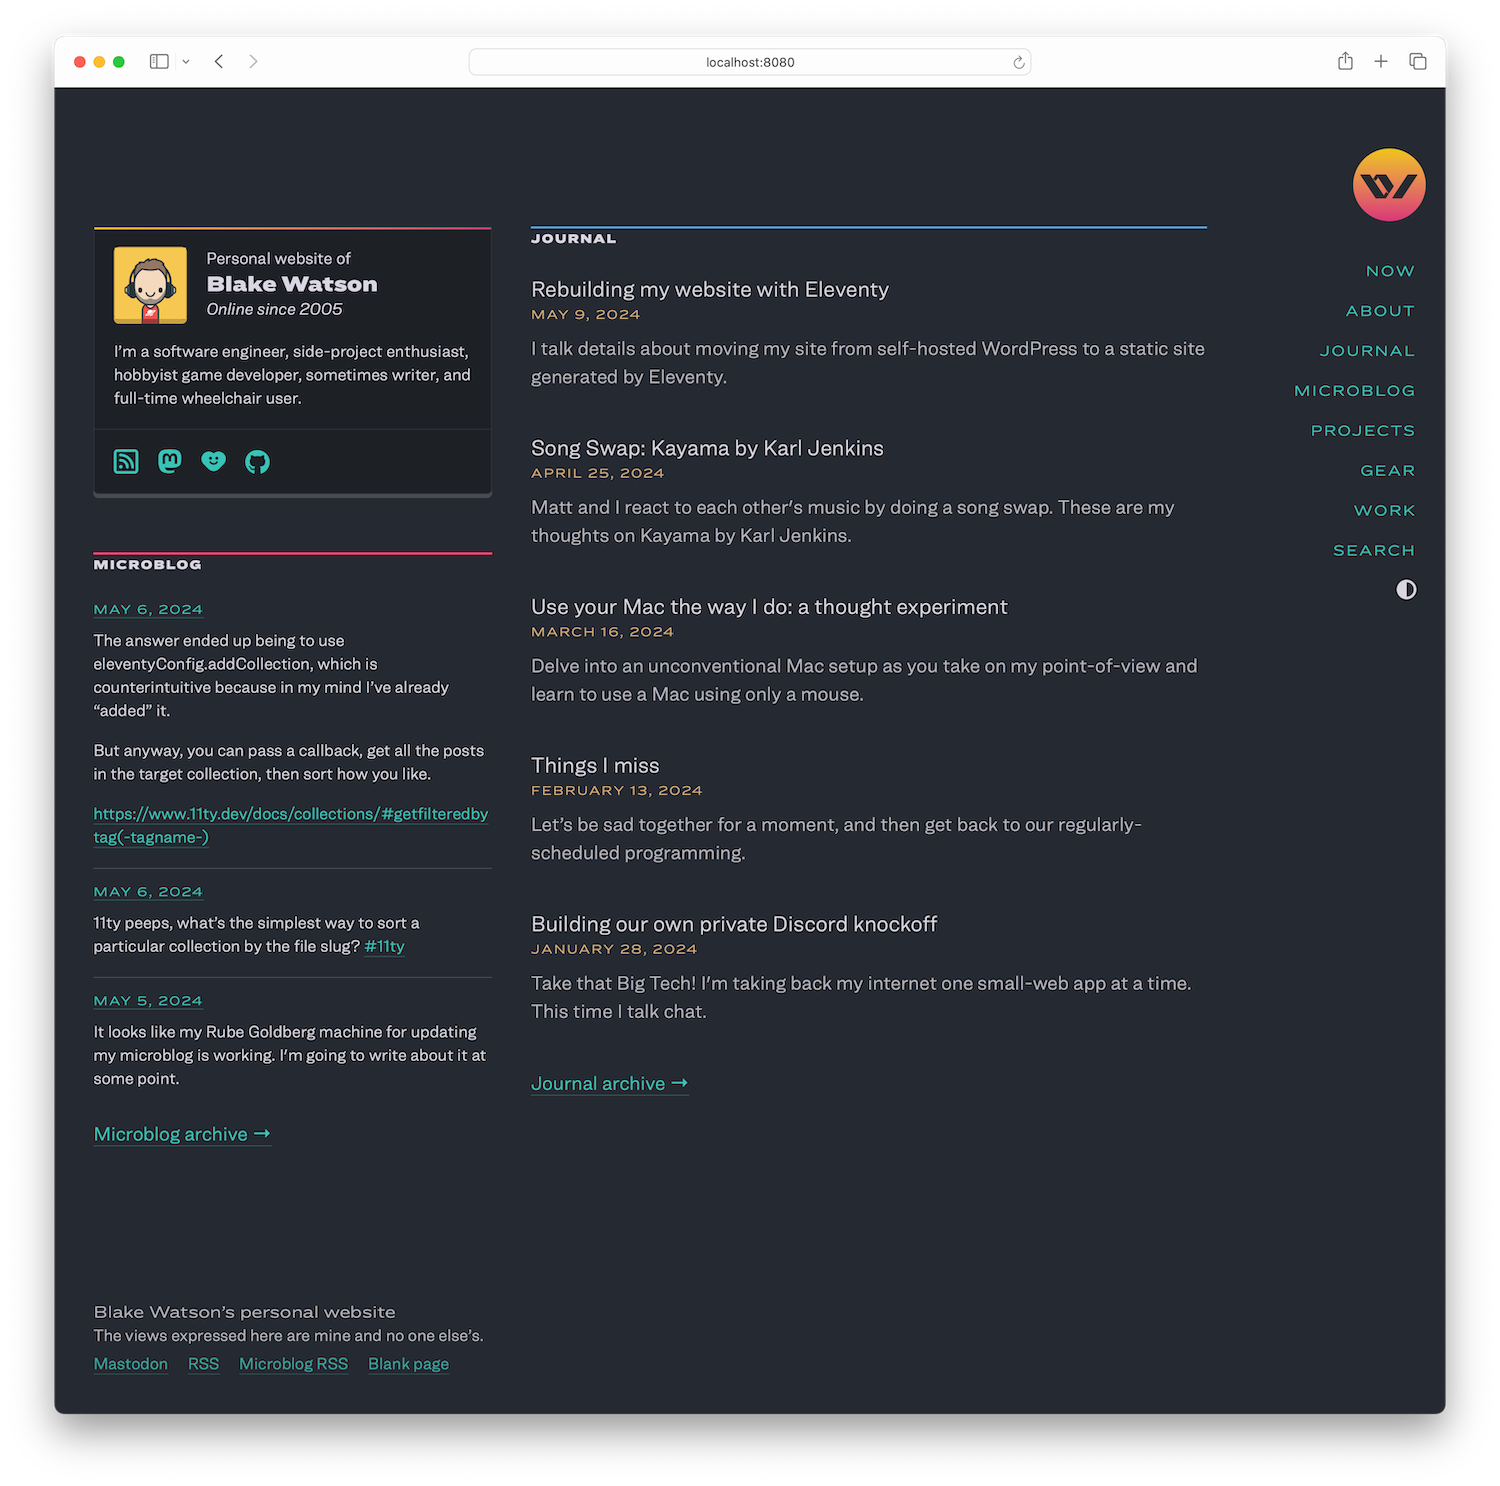 Screenshot of my homepage in dark mode inside of a Safari window. There are 5 journal articles listed in the widest column. A card with my avatar, a one-sentence bio, and some social links are in the sidebar. Below that are 3 microblog posts.